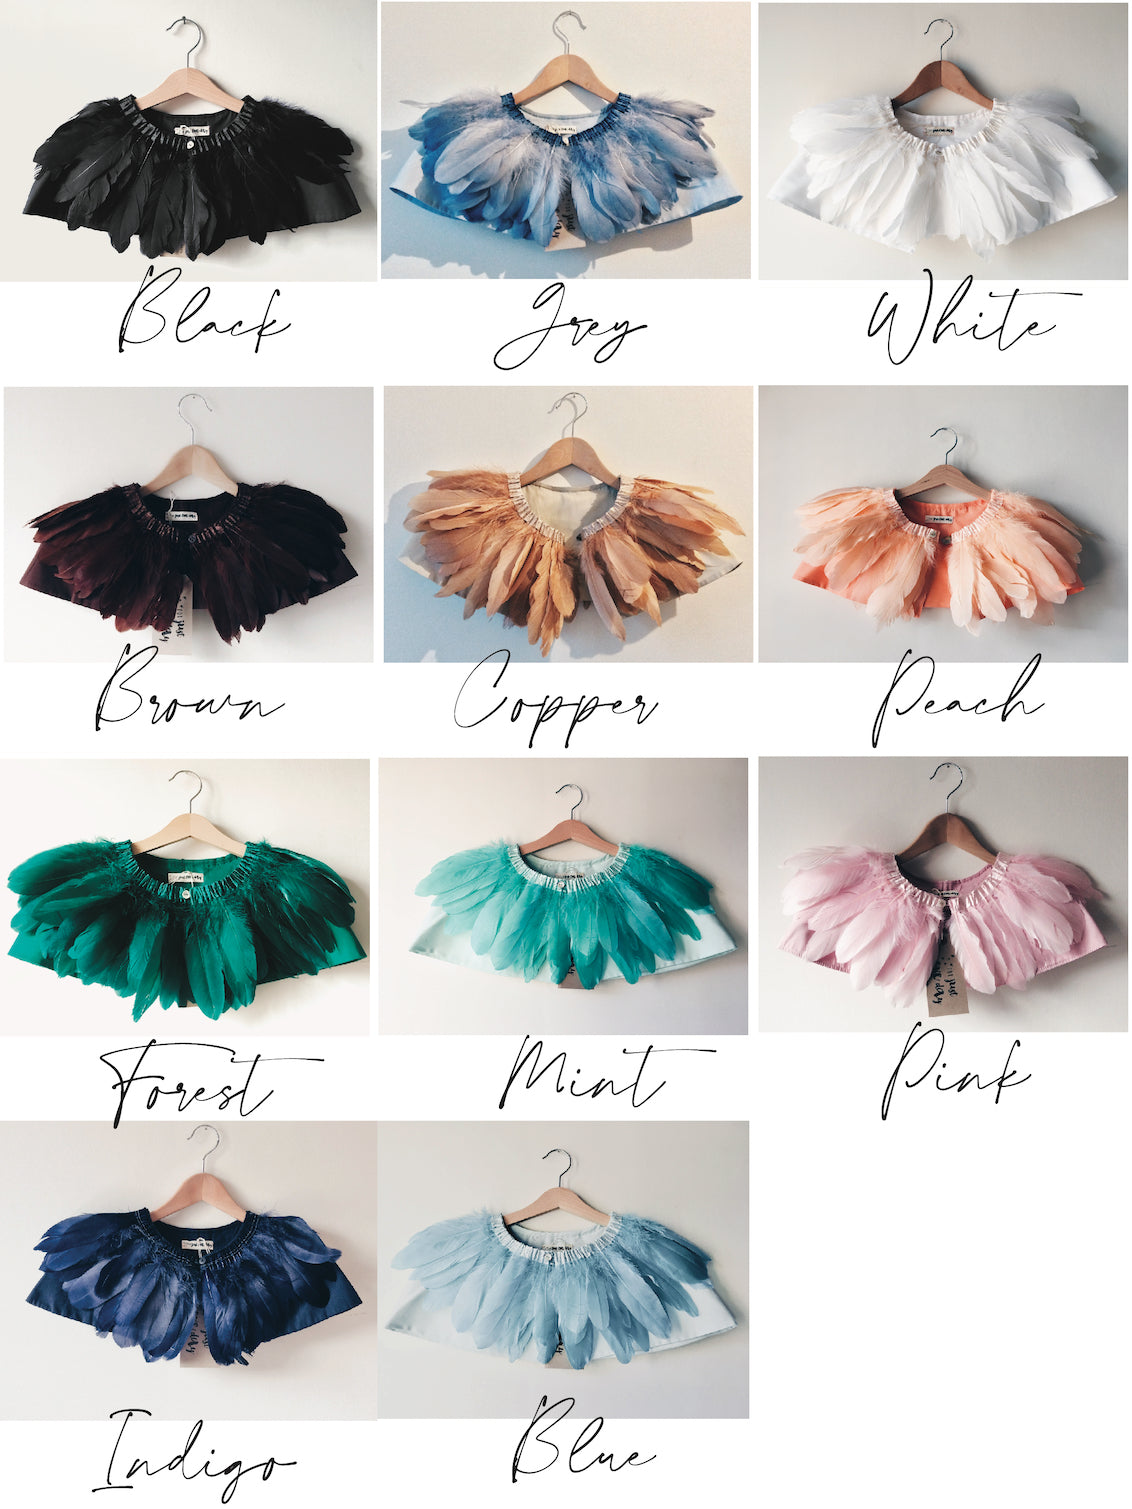 11 feather cape colour variations in a grid formation